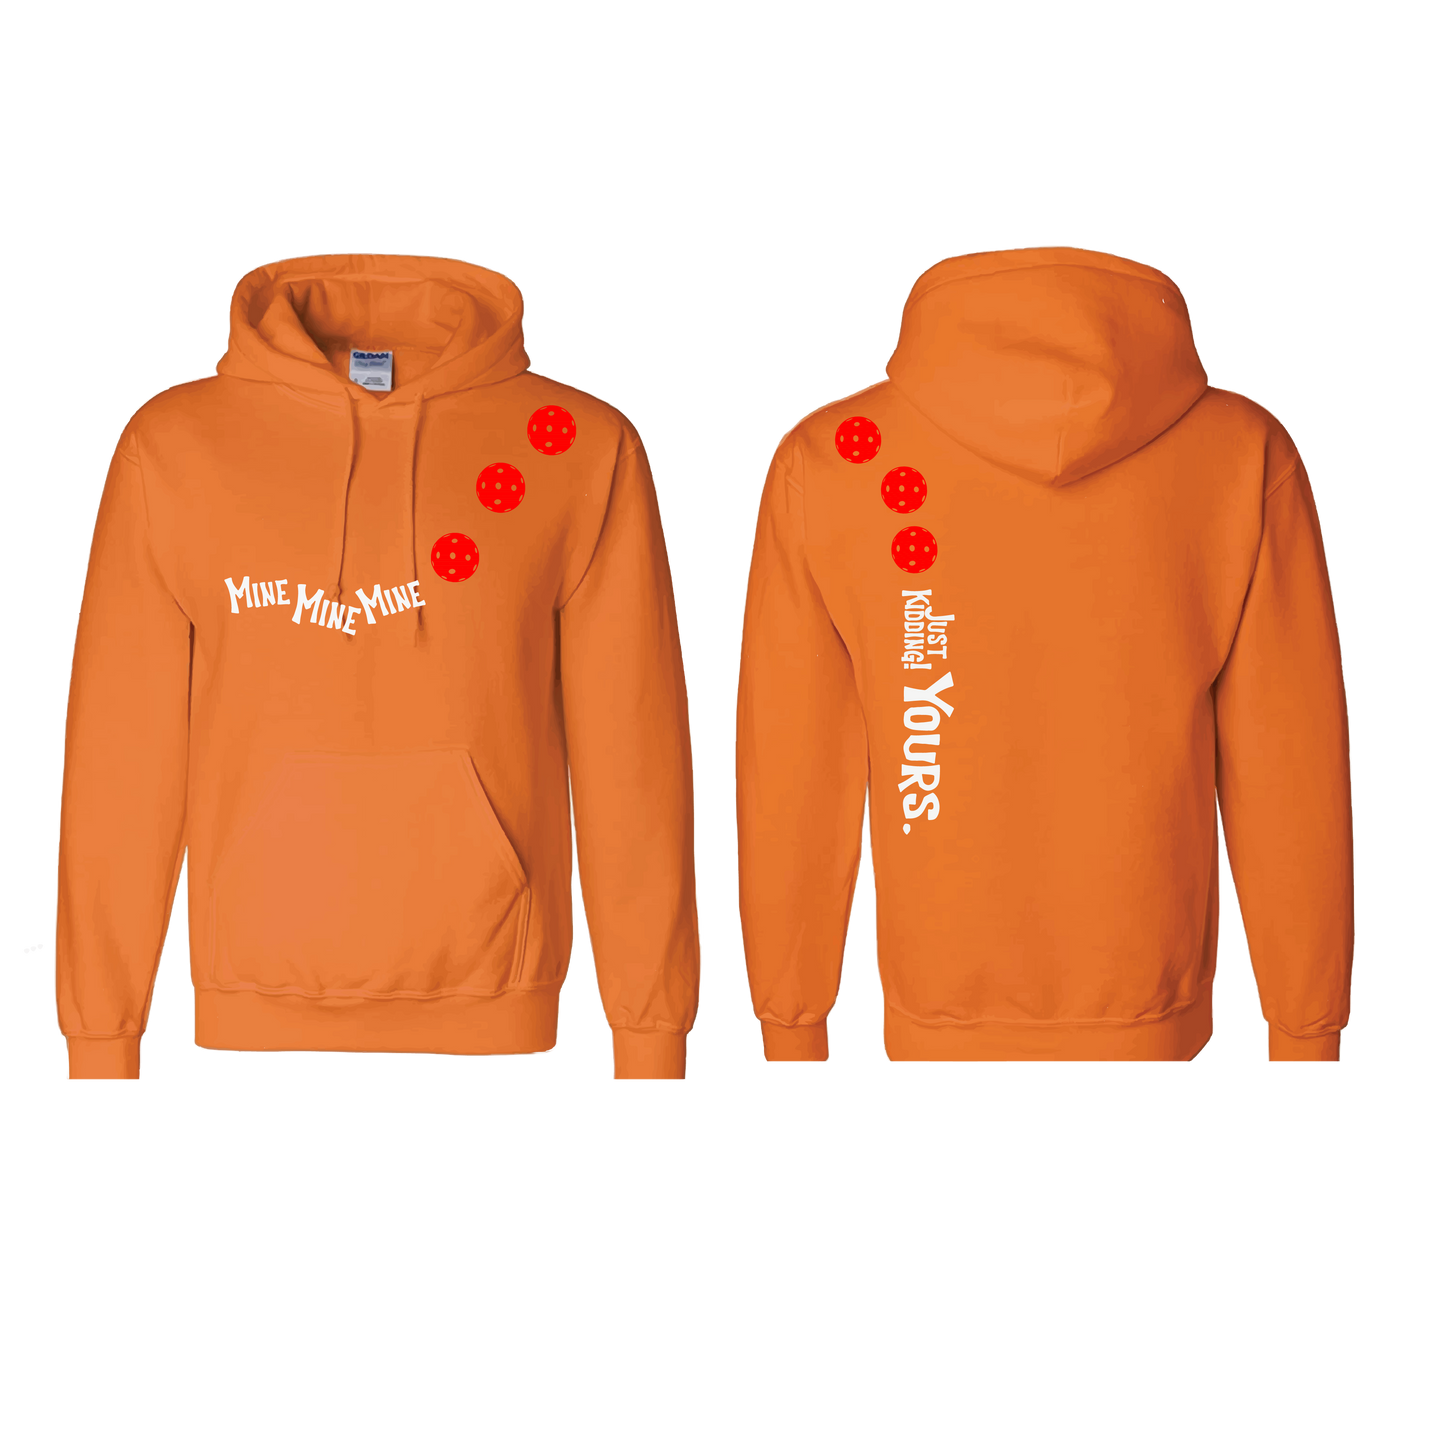 Mine JK Yours (Pickleball Colors Orange Yellow or Red) | Unisex Hoodie Athletic Sweatshirt | 50% Cotton/50% Polyester